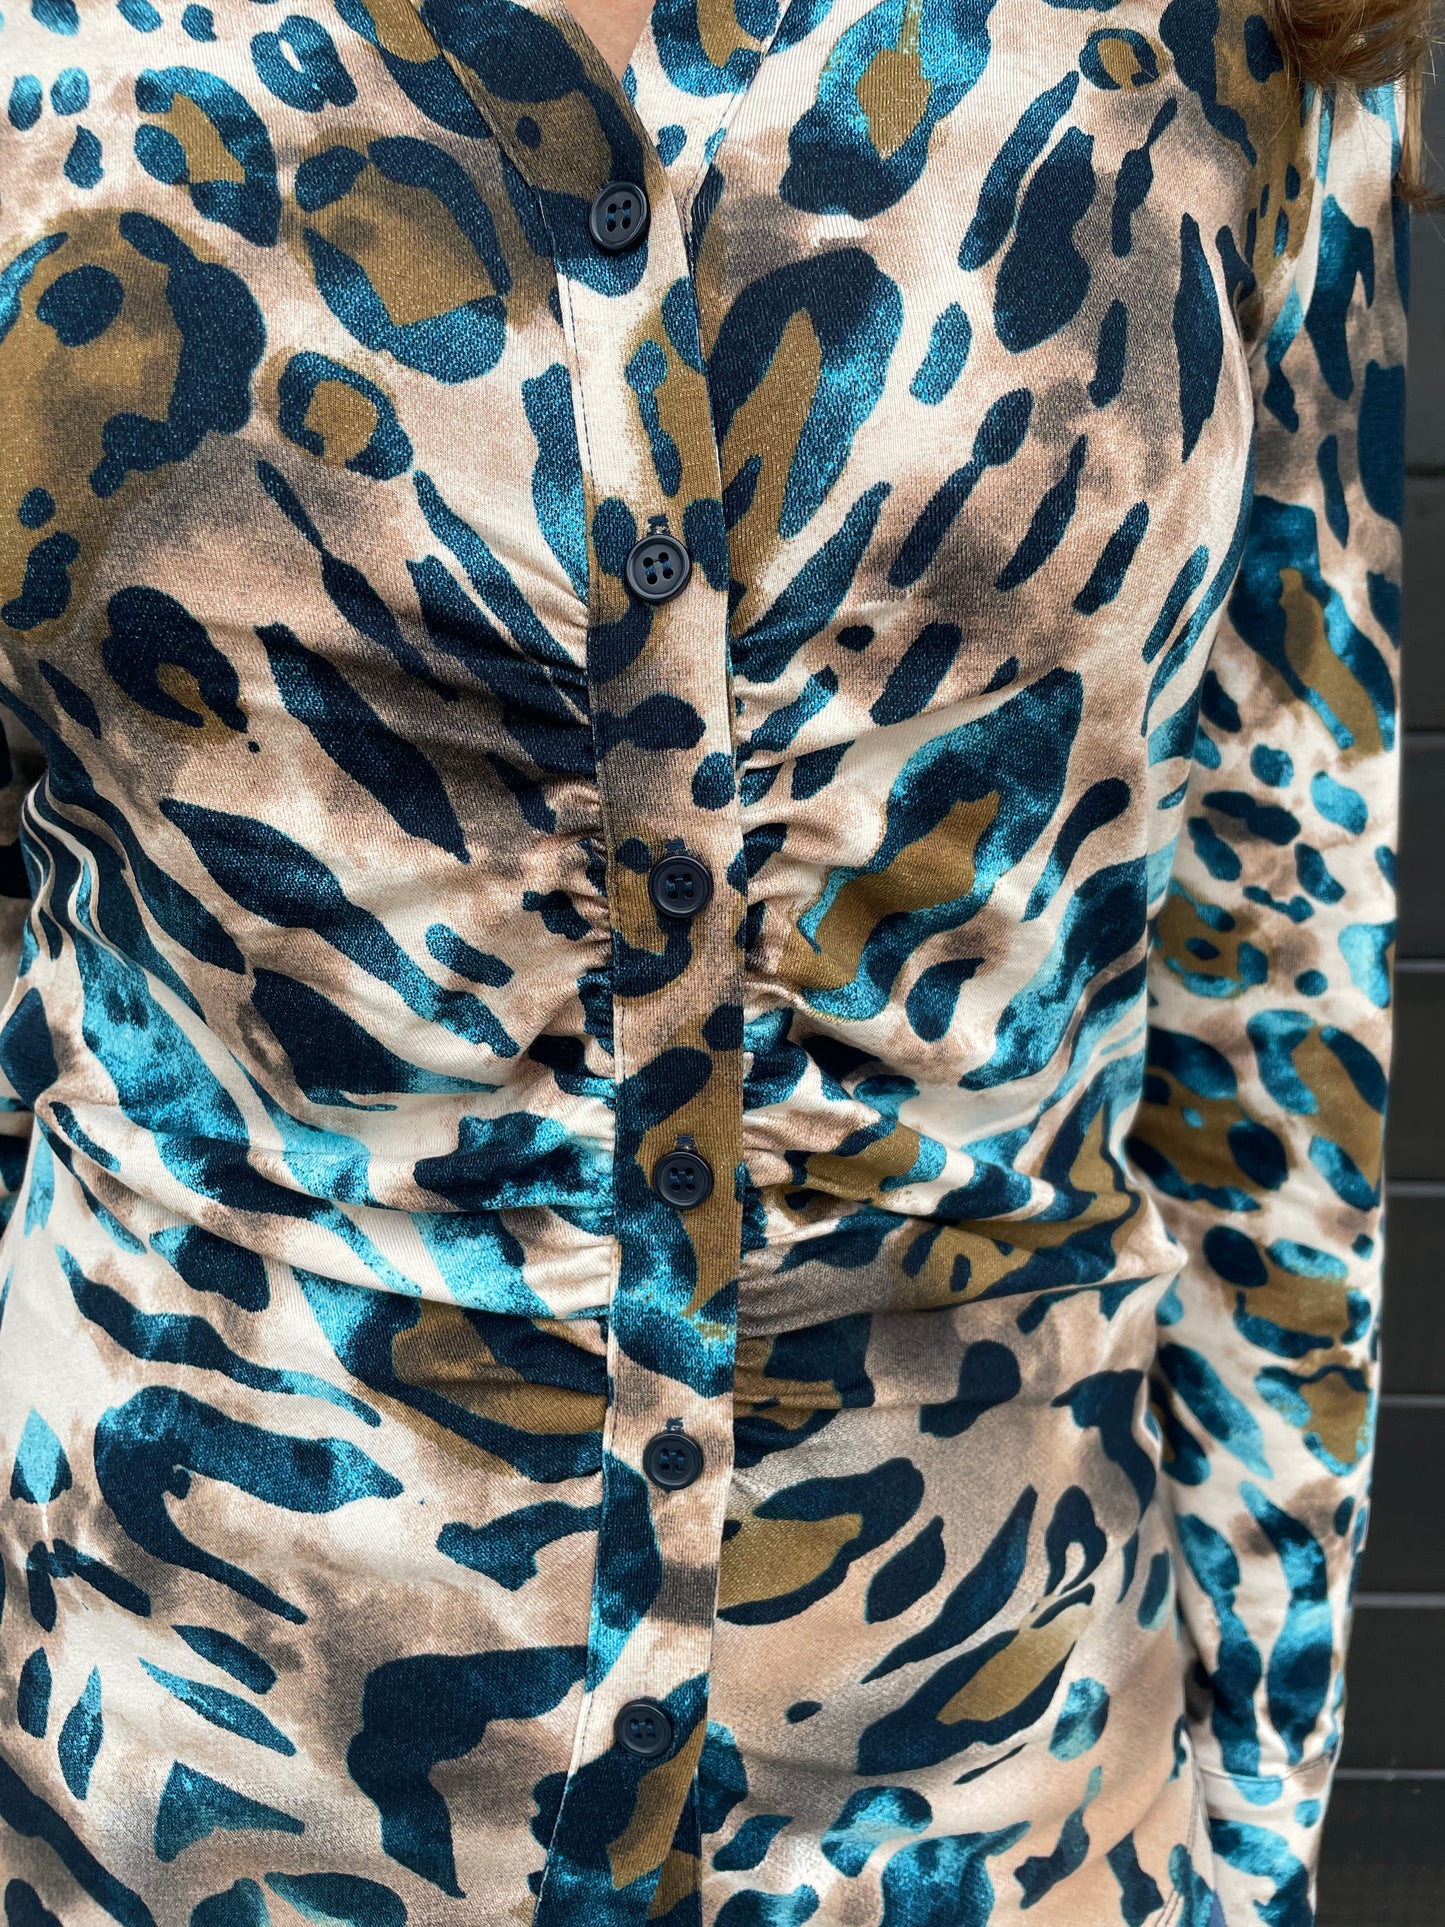 Esqualo Jersey Rouch Front Leopard Print Top - Size XL Available